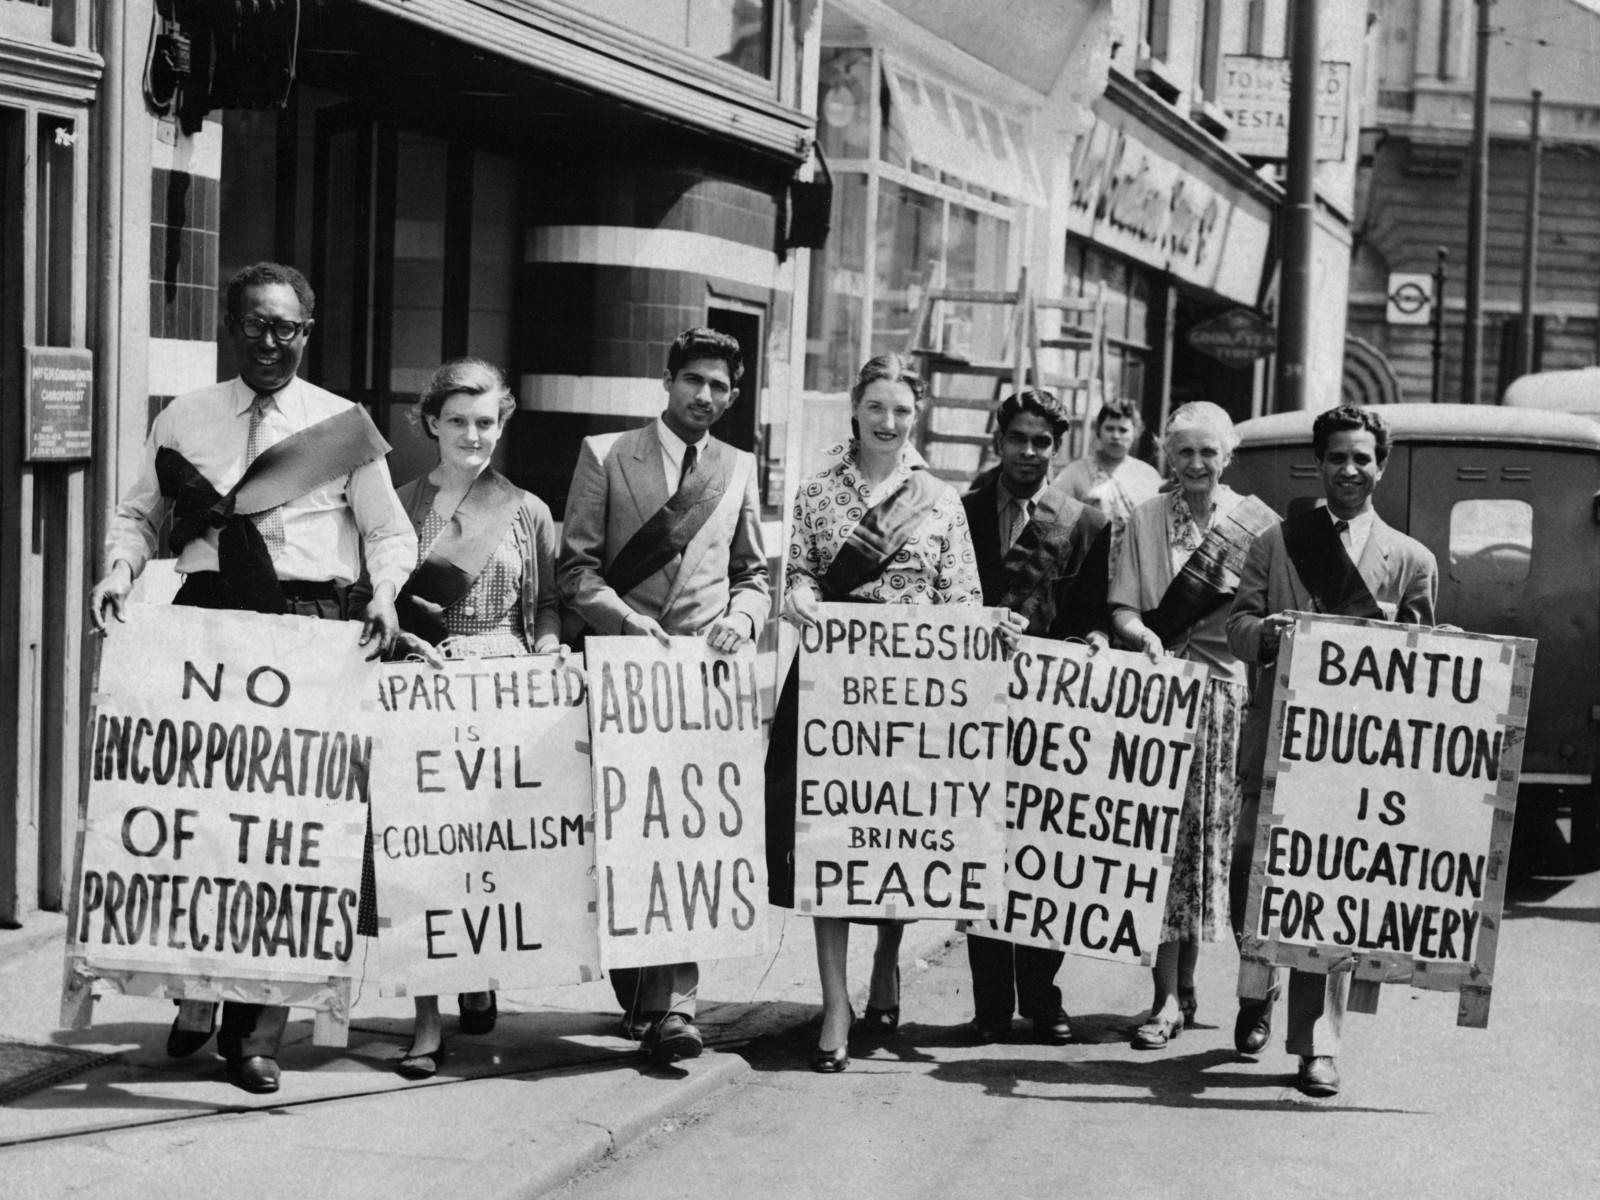 Members of the Movement for Colonial Freedom and the Black Sash Movement march to South Africa House, 1956 (Hulton-Deutsch Collection/CORBIS/Corbis via Getty Images)